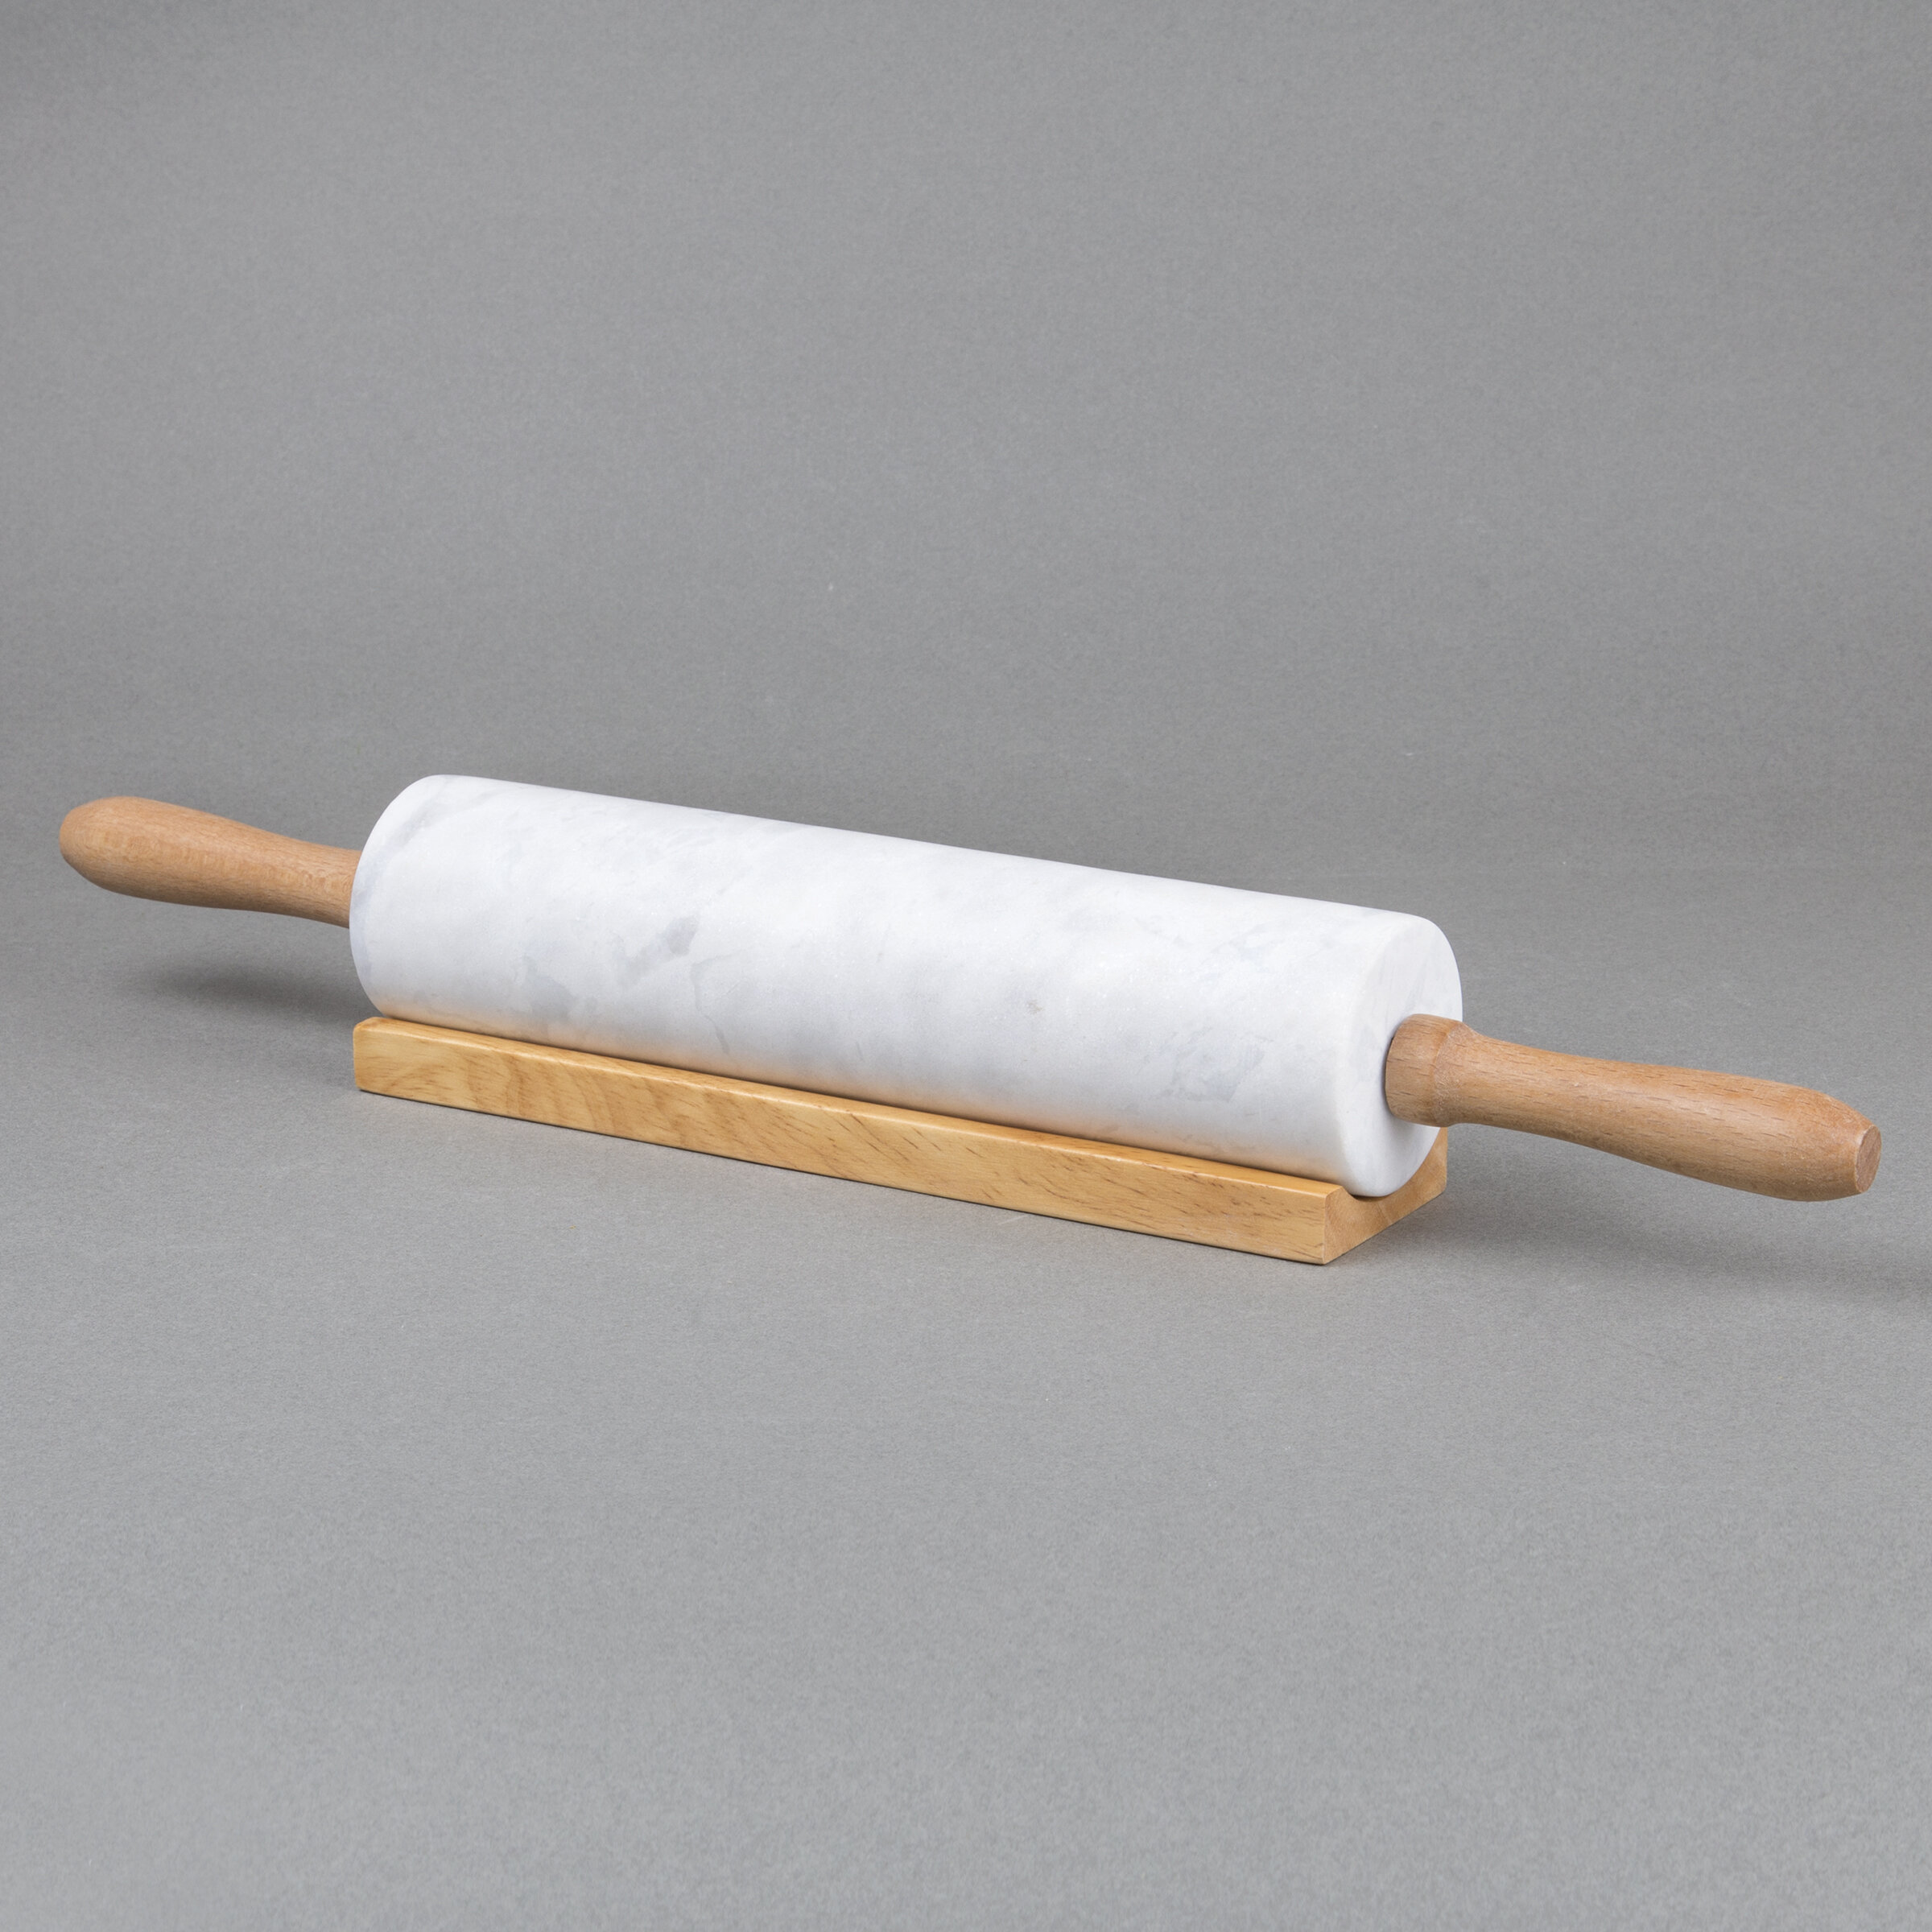 marble rolling pin kmart